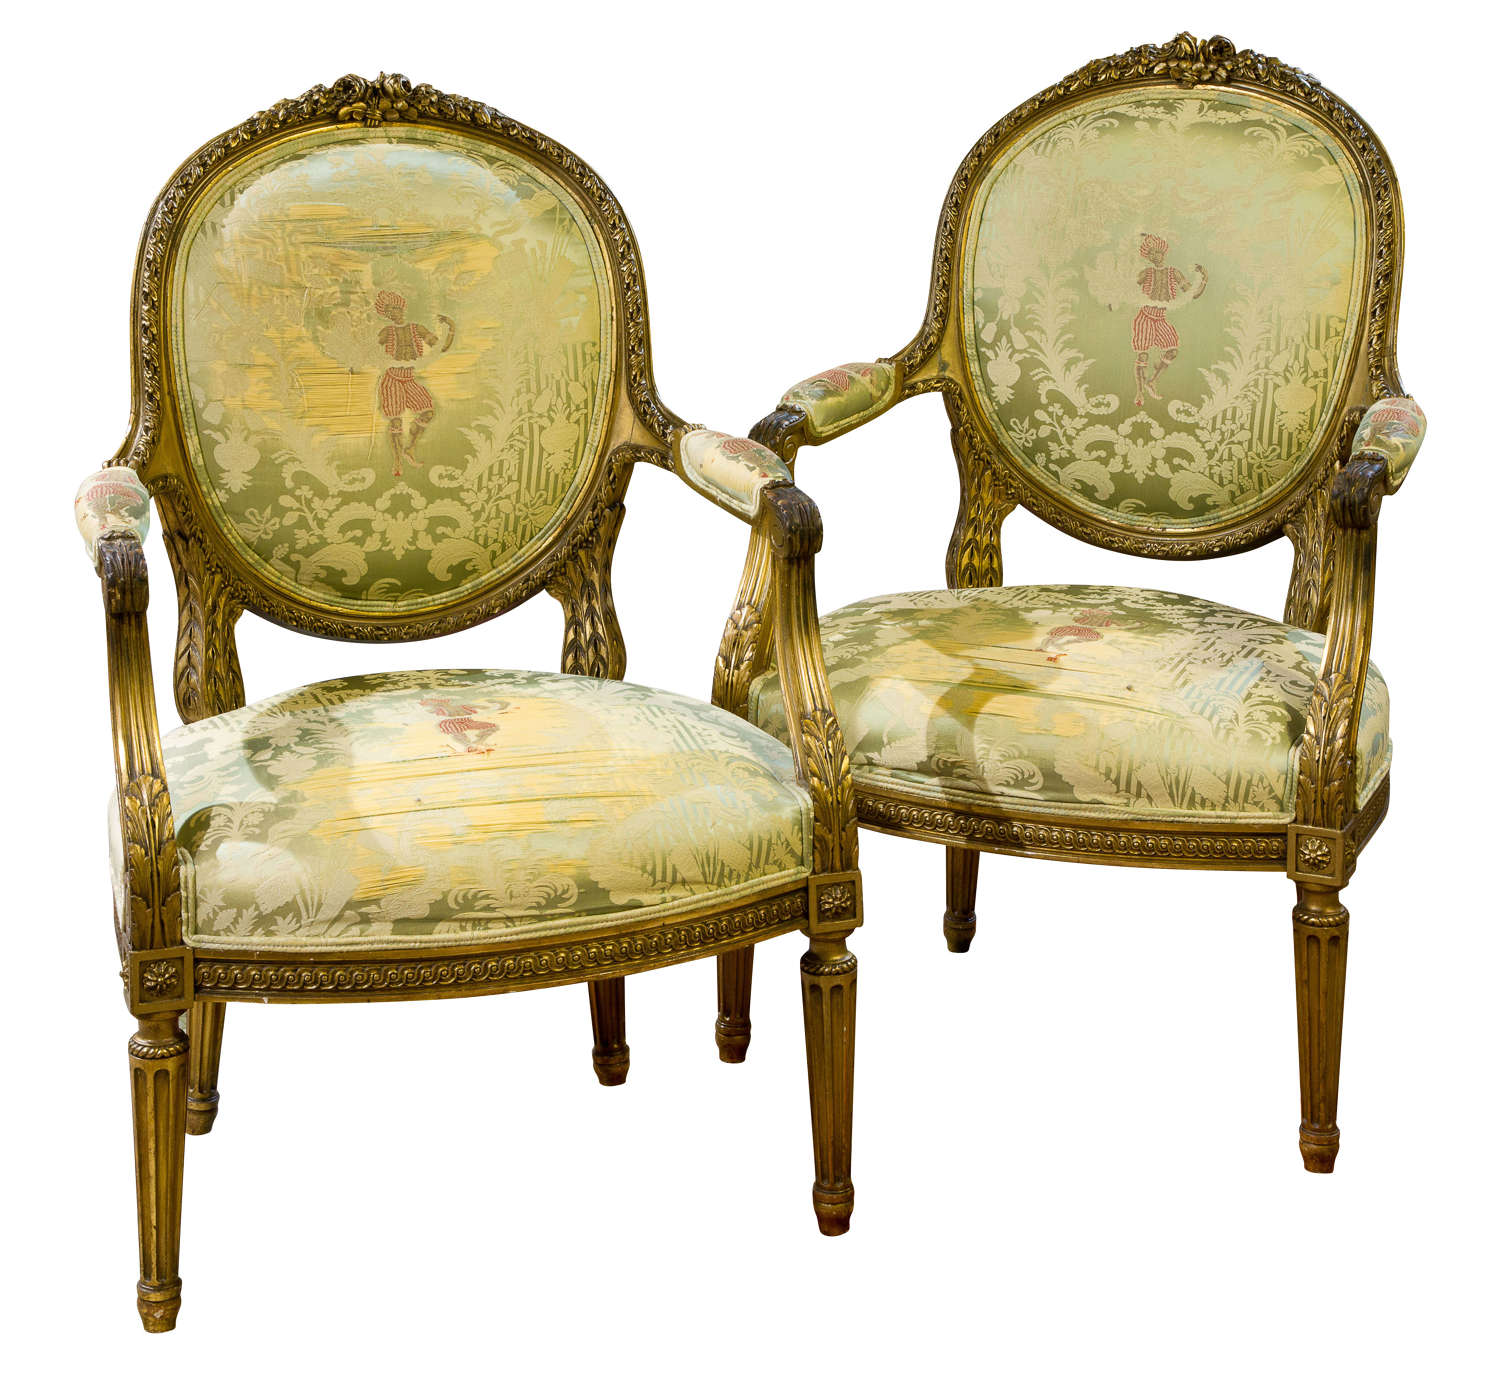 A pair of 19thC gilded oval back Louis XVI Style chairs